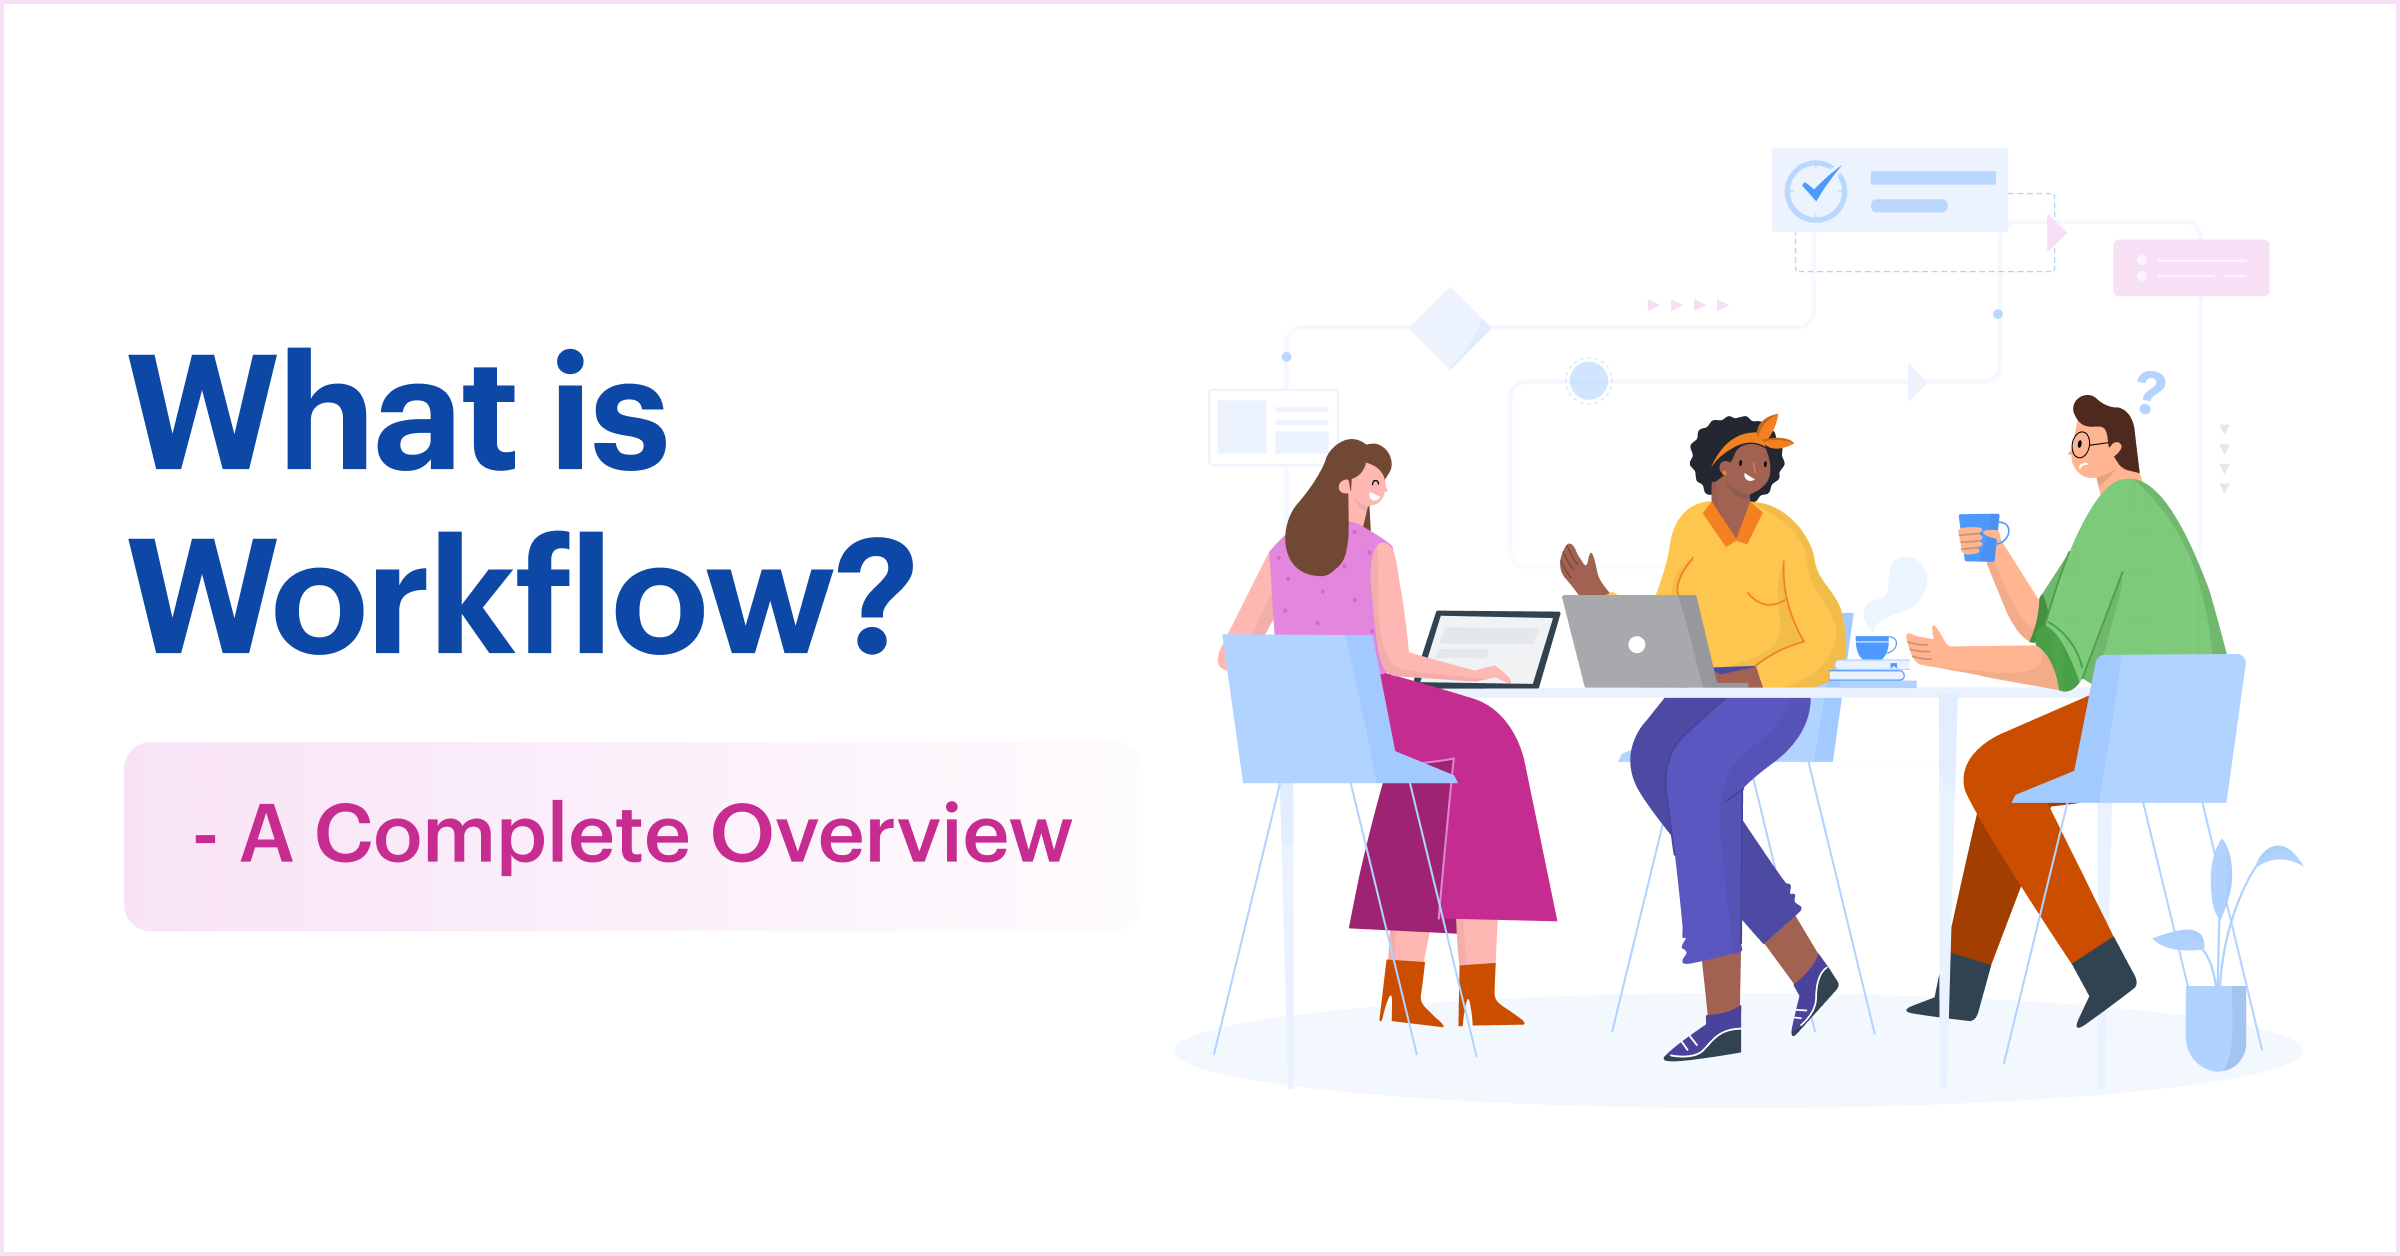 What is Workflow? A Complete Overview